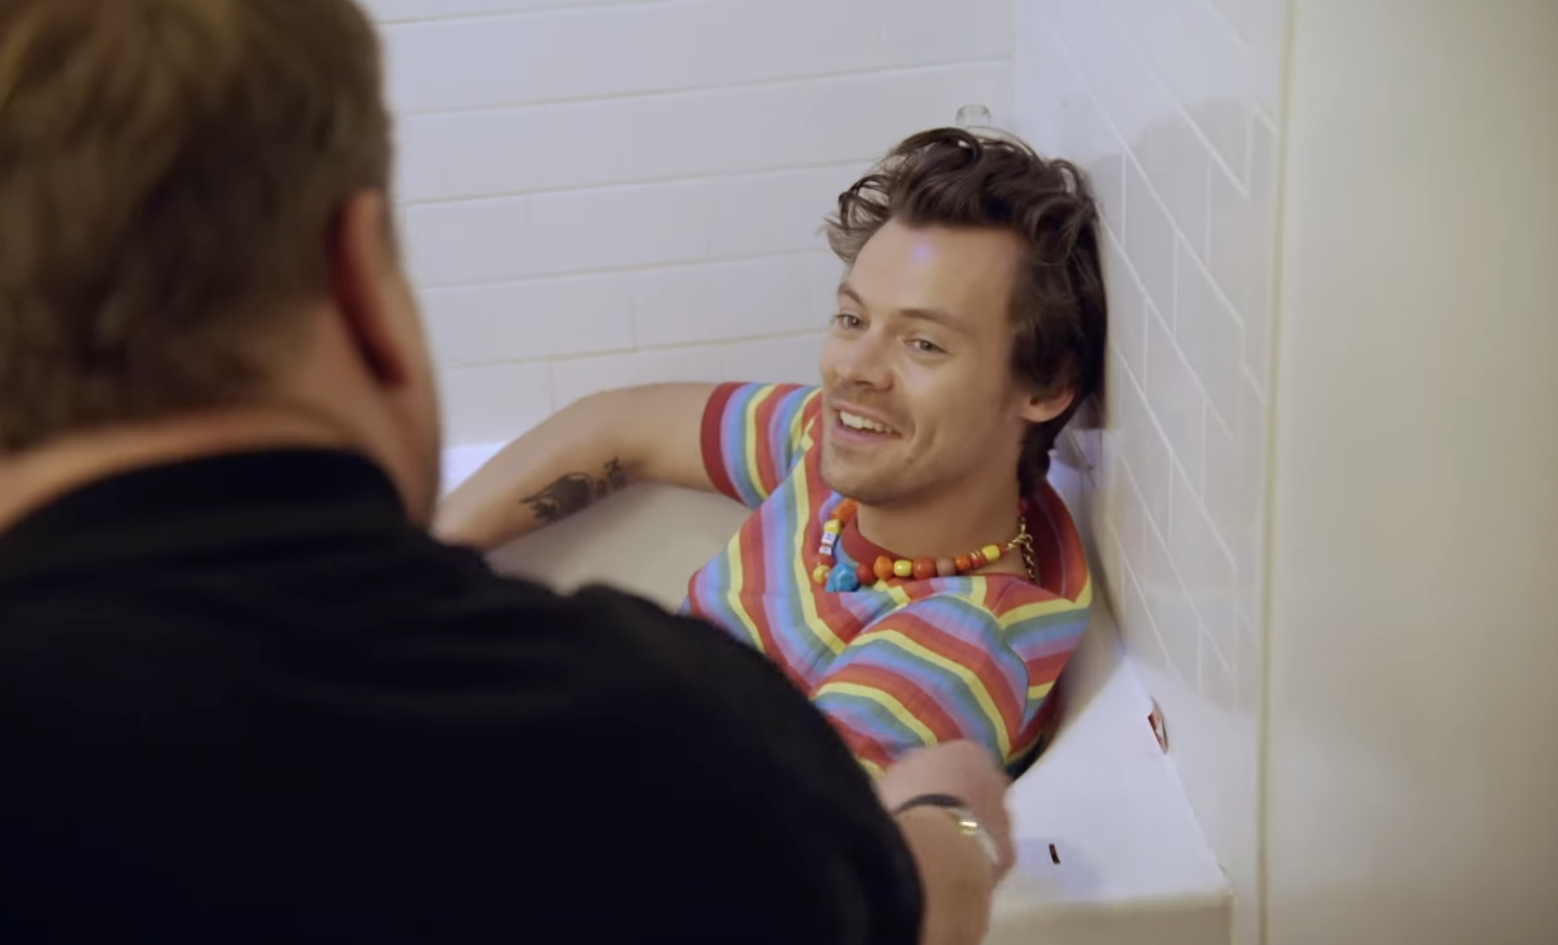 Styles sits in a bathtub, smiling at Corden